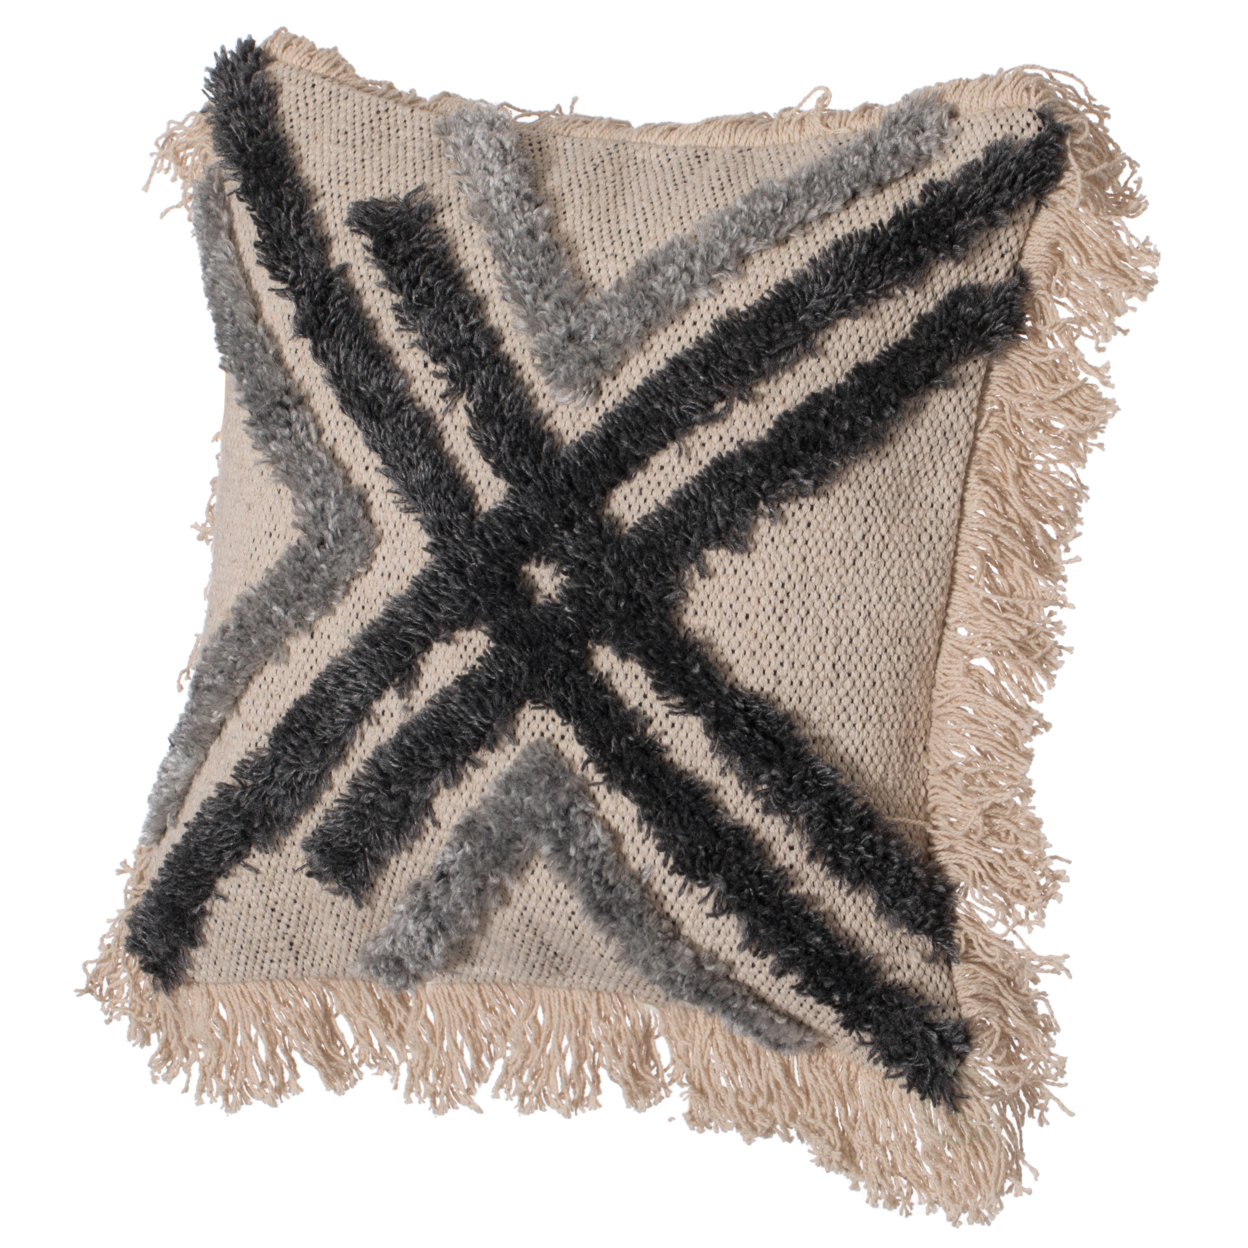 16 Handwoven Cotton & Silk Throw Fringed Pillow Cover Embossed Zig Zag & Crossed Lines Design - Zig Zag